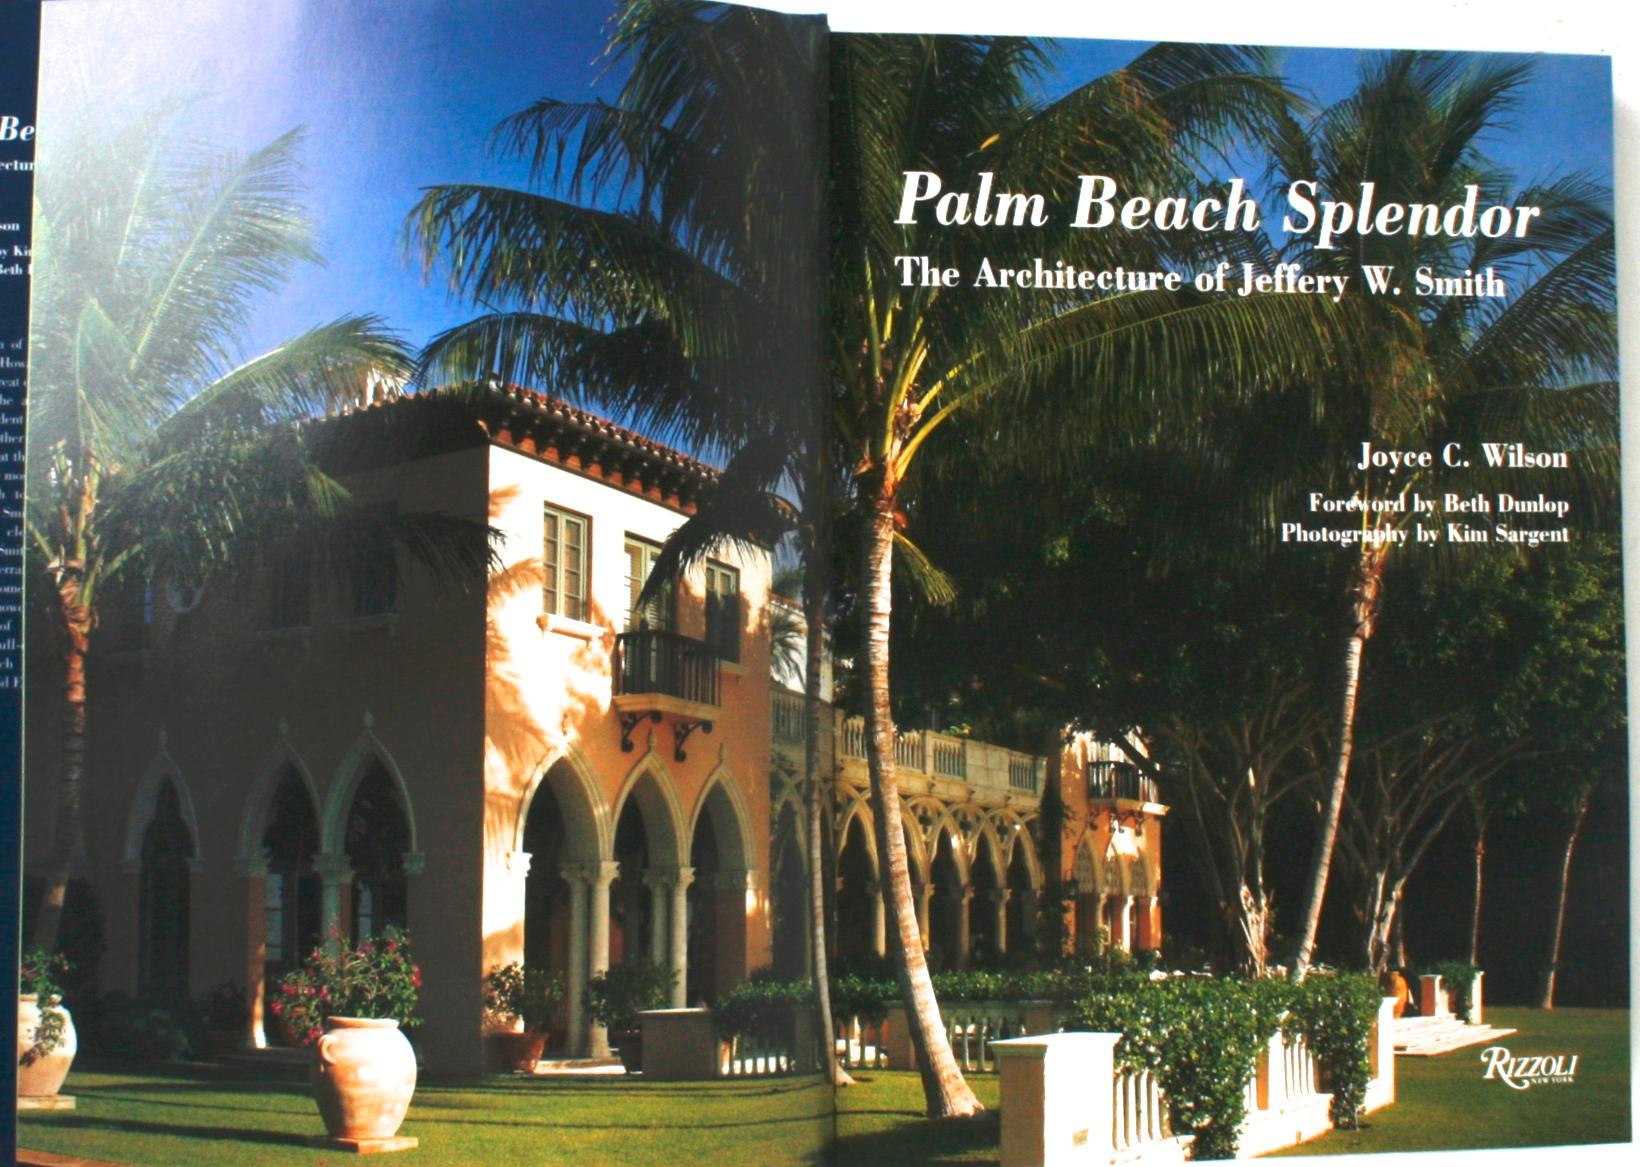 Palm Beach Splendor, The Architecture of Jeffrey W. Smith. New York: Rizzoli, 2009. Signed edition hardcover with dust jacket. 256 pp. A beautiful coffee table book on Palm Beach's premier architect Jeff Smith. The book showcases 17 of his works